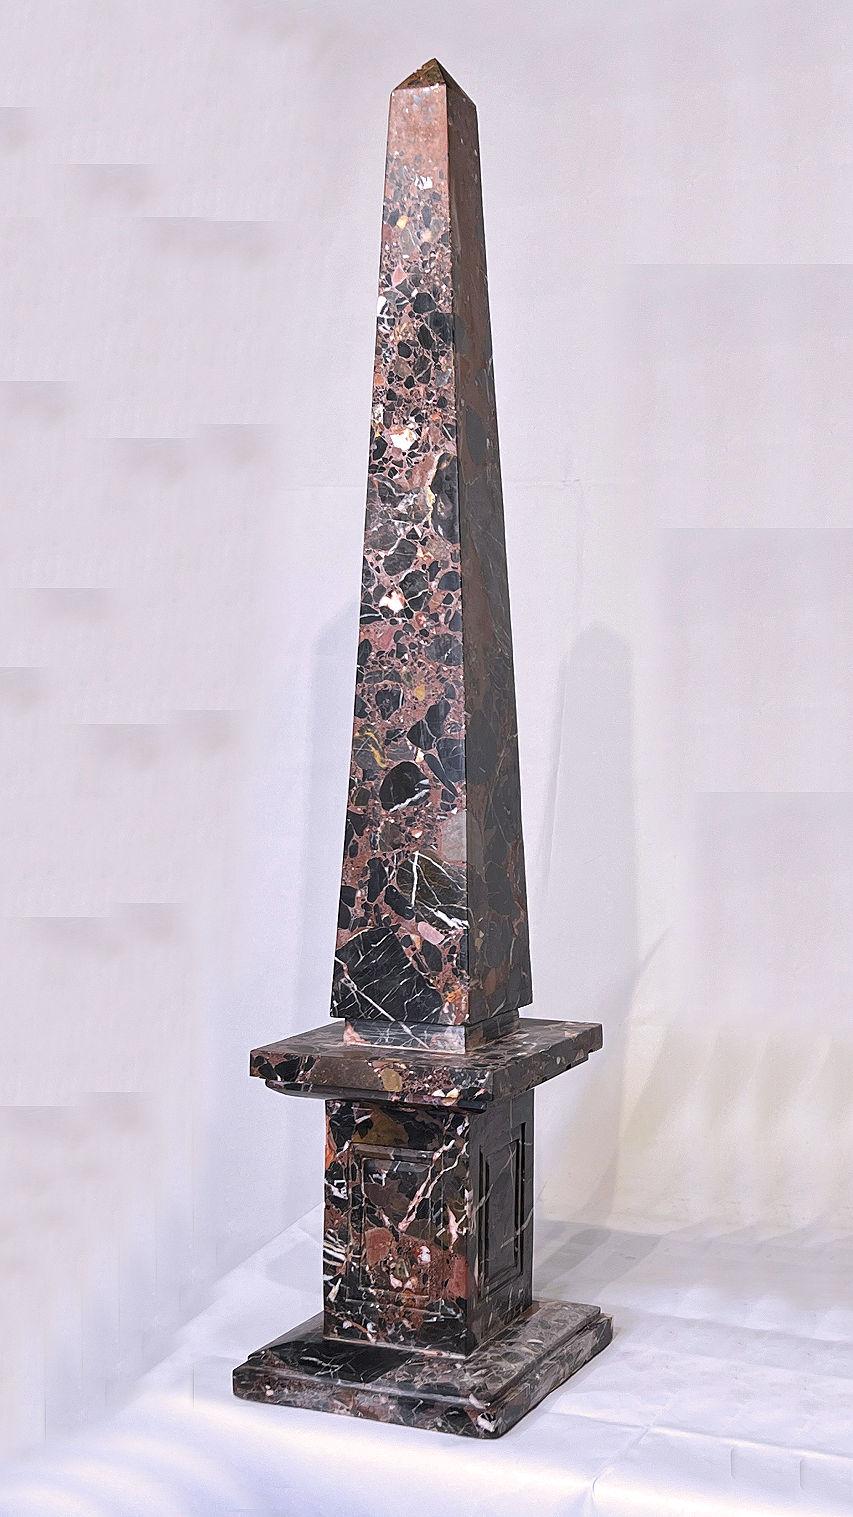 Our very tall vintage rouge marble obelisk measures 39 3/4 inches (over 1 meter) tall and is in good condition.